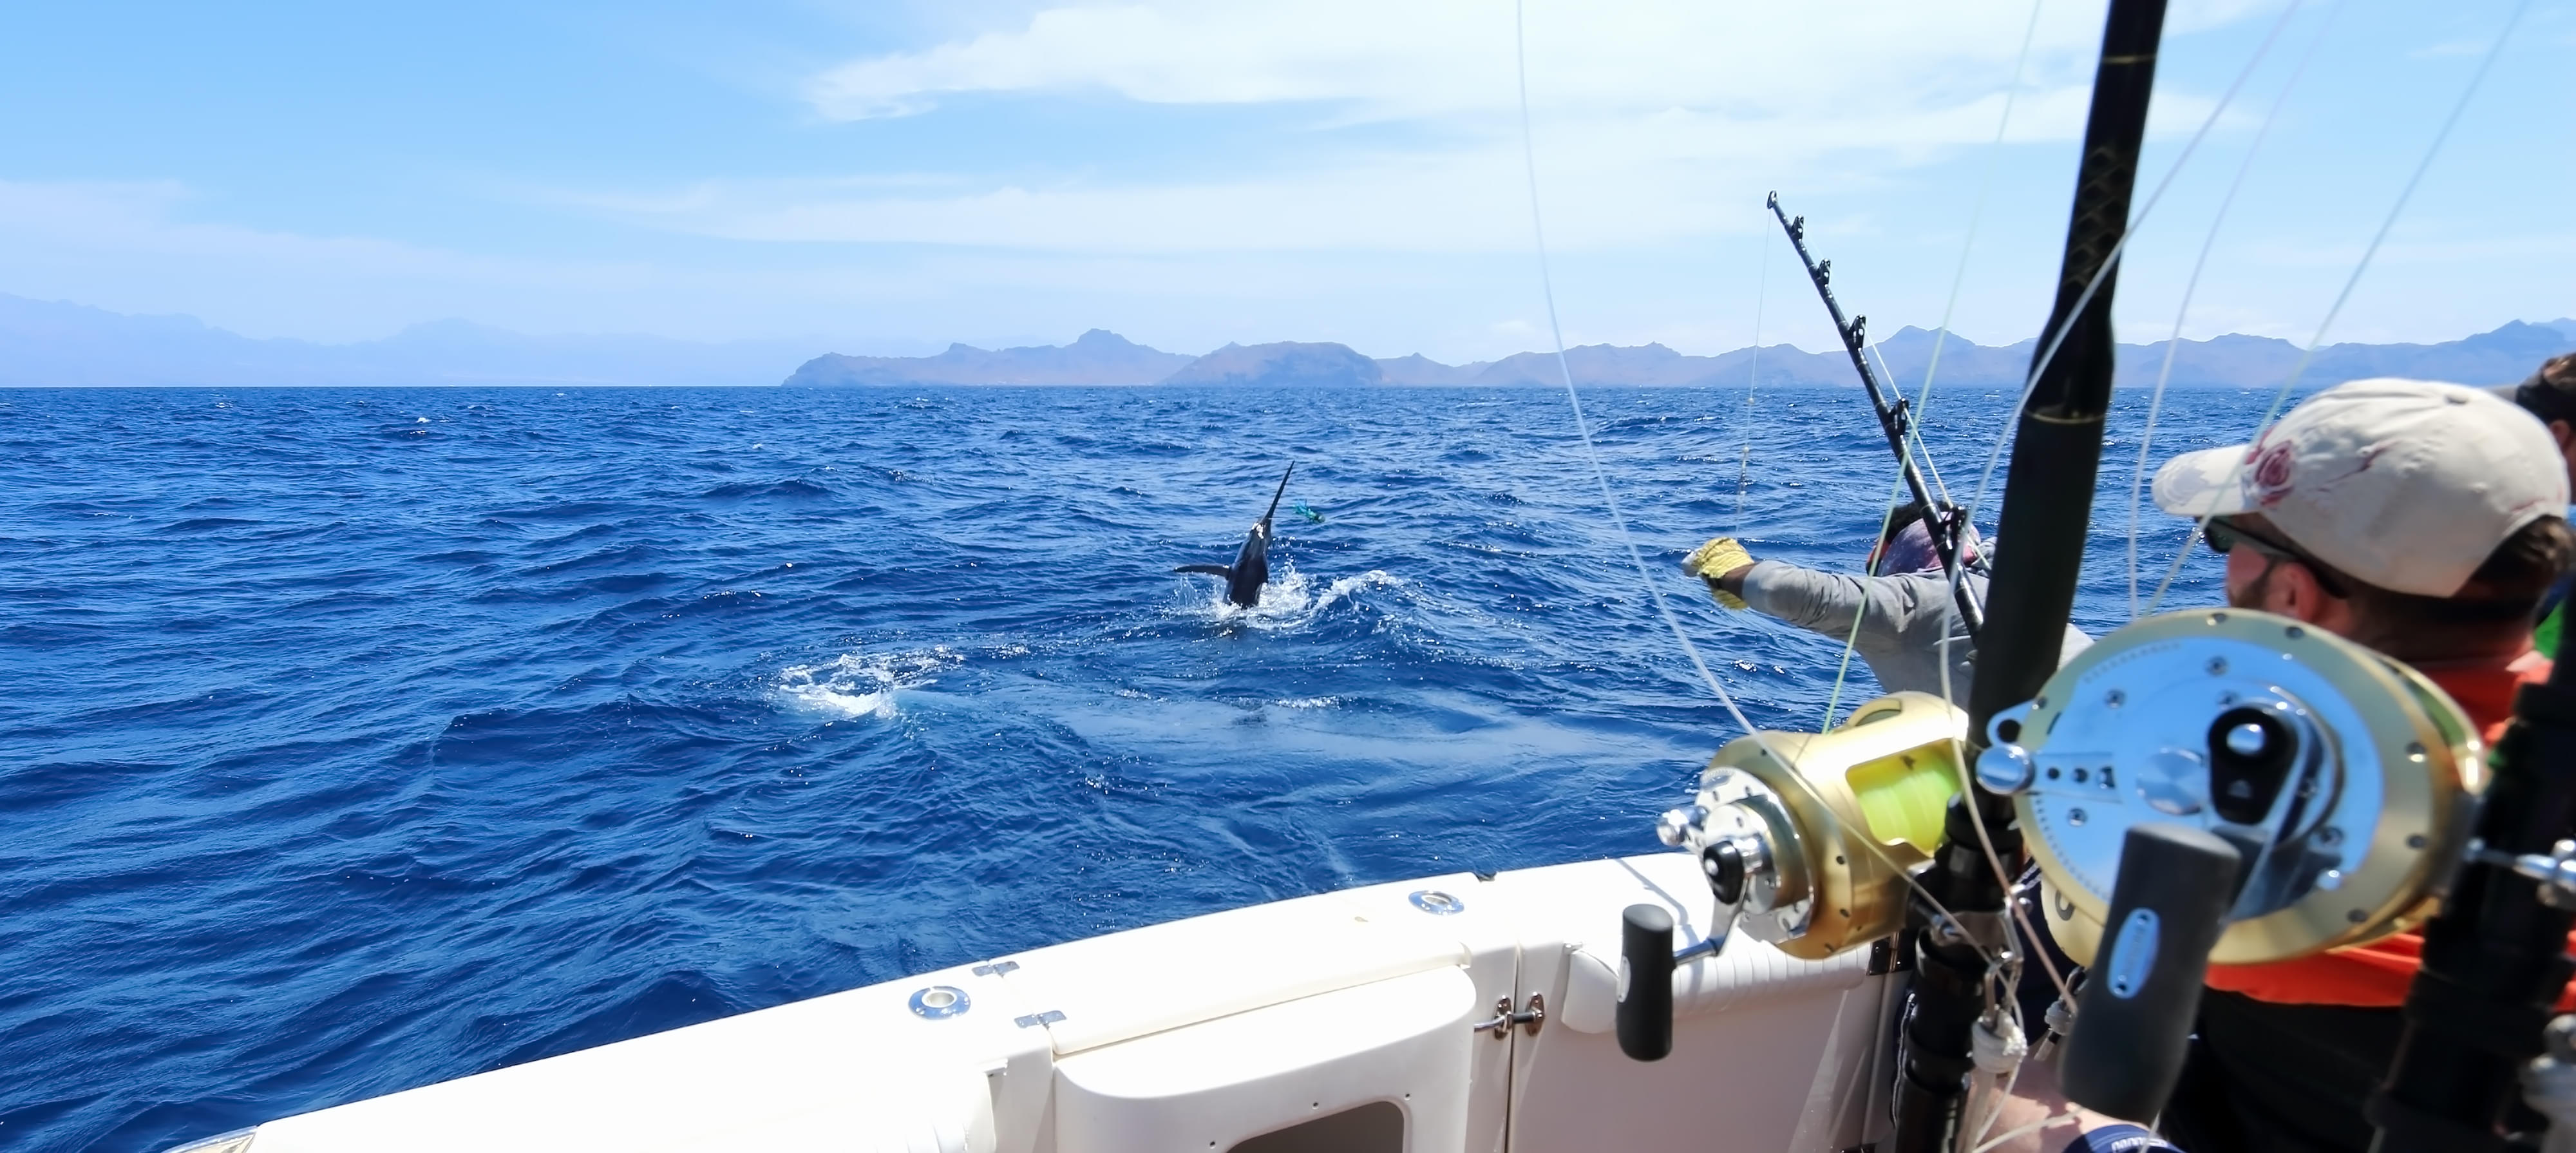 Embark on an exciting fishing trip to Langkawi